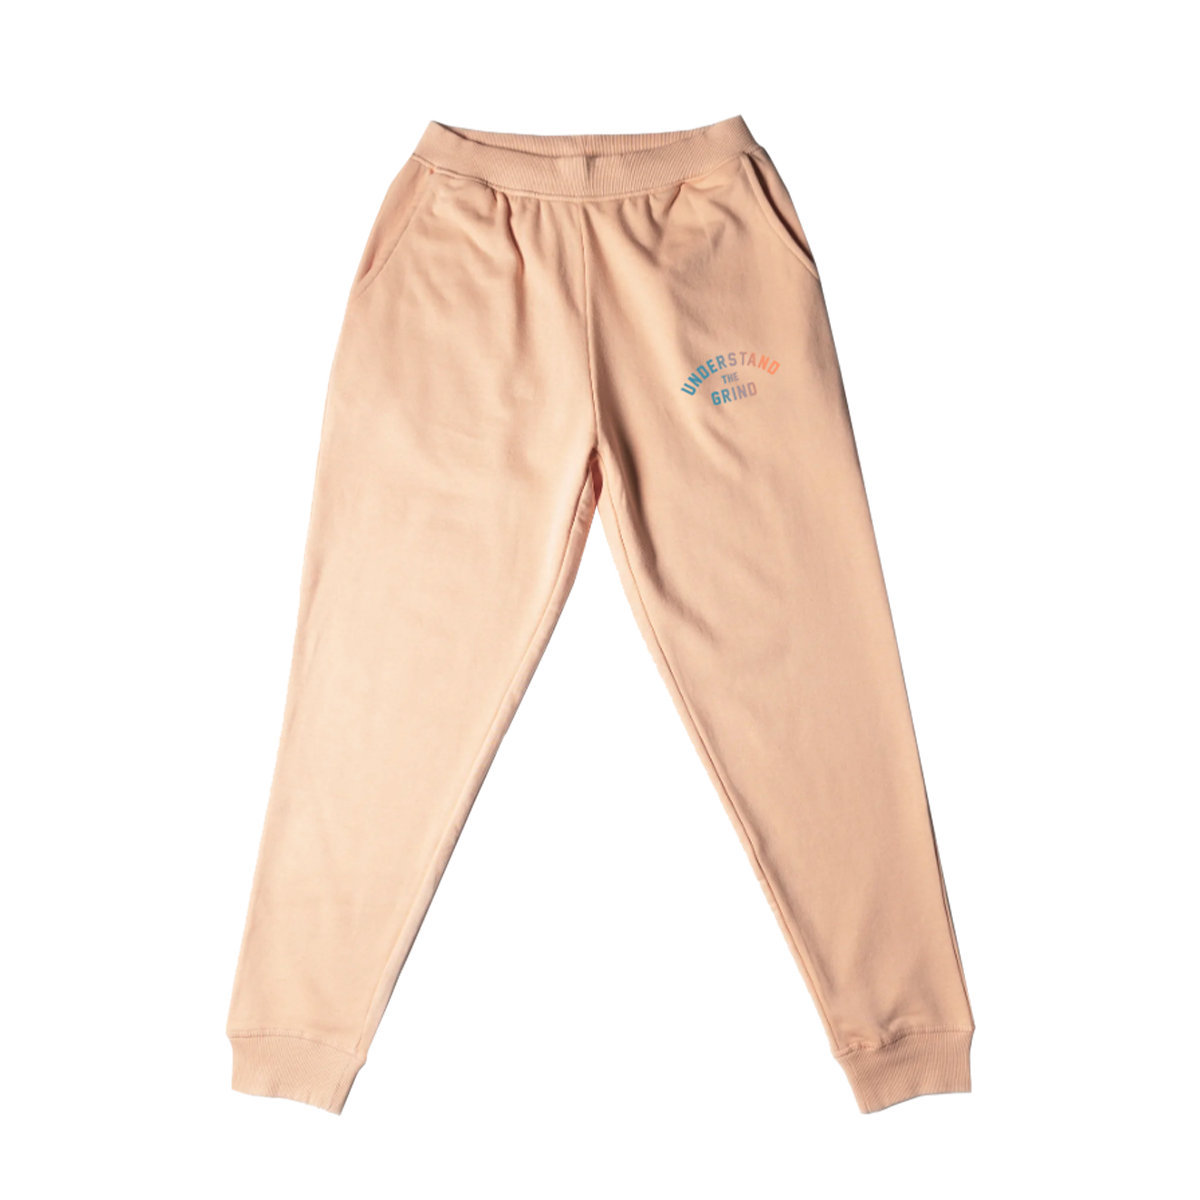 Understand the Grind Arch Multi-Color Joggers - Peach